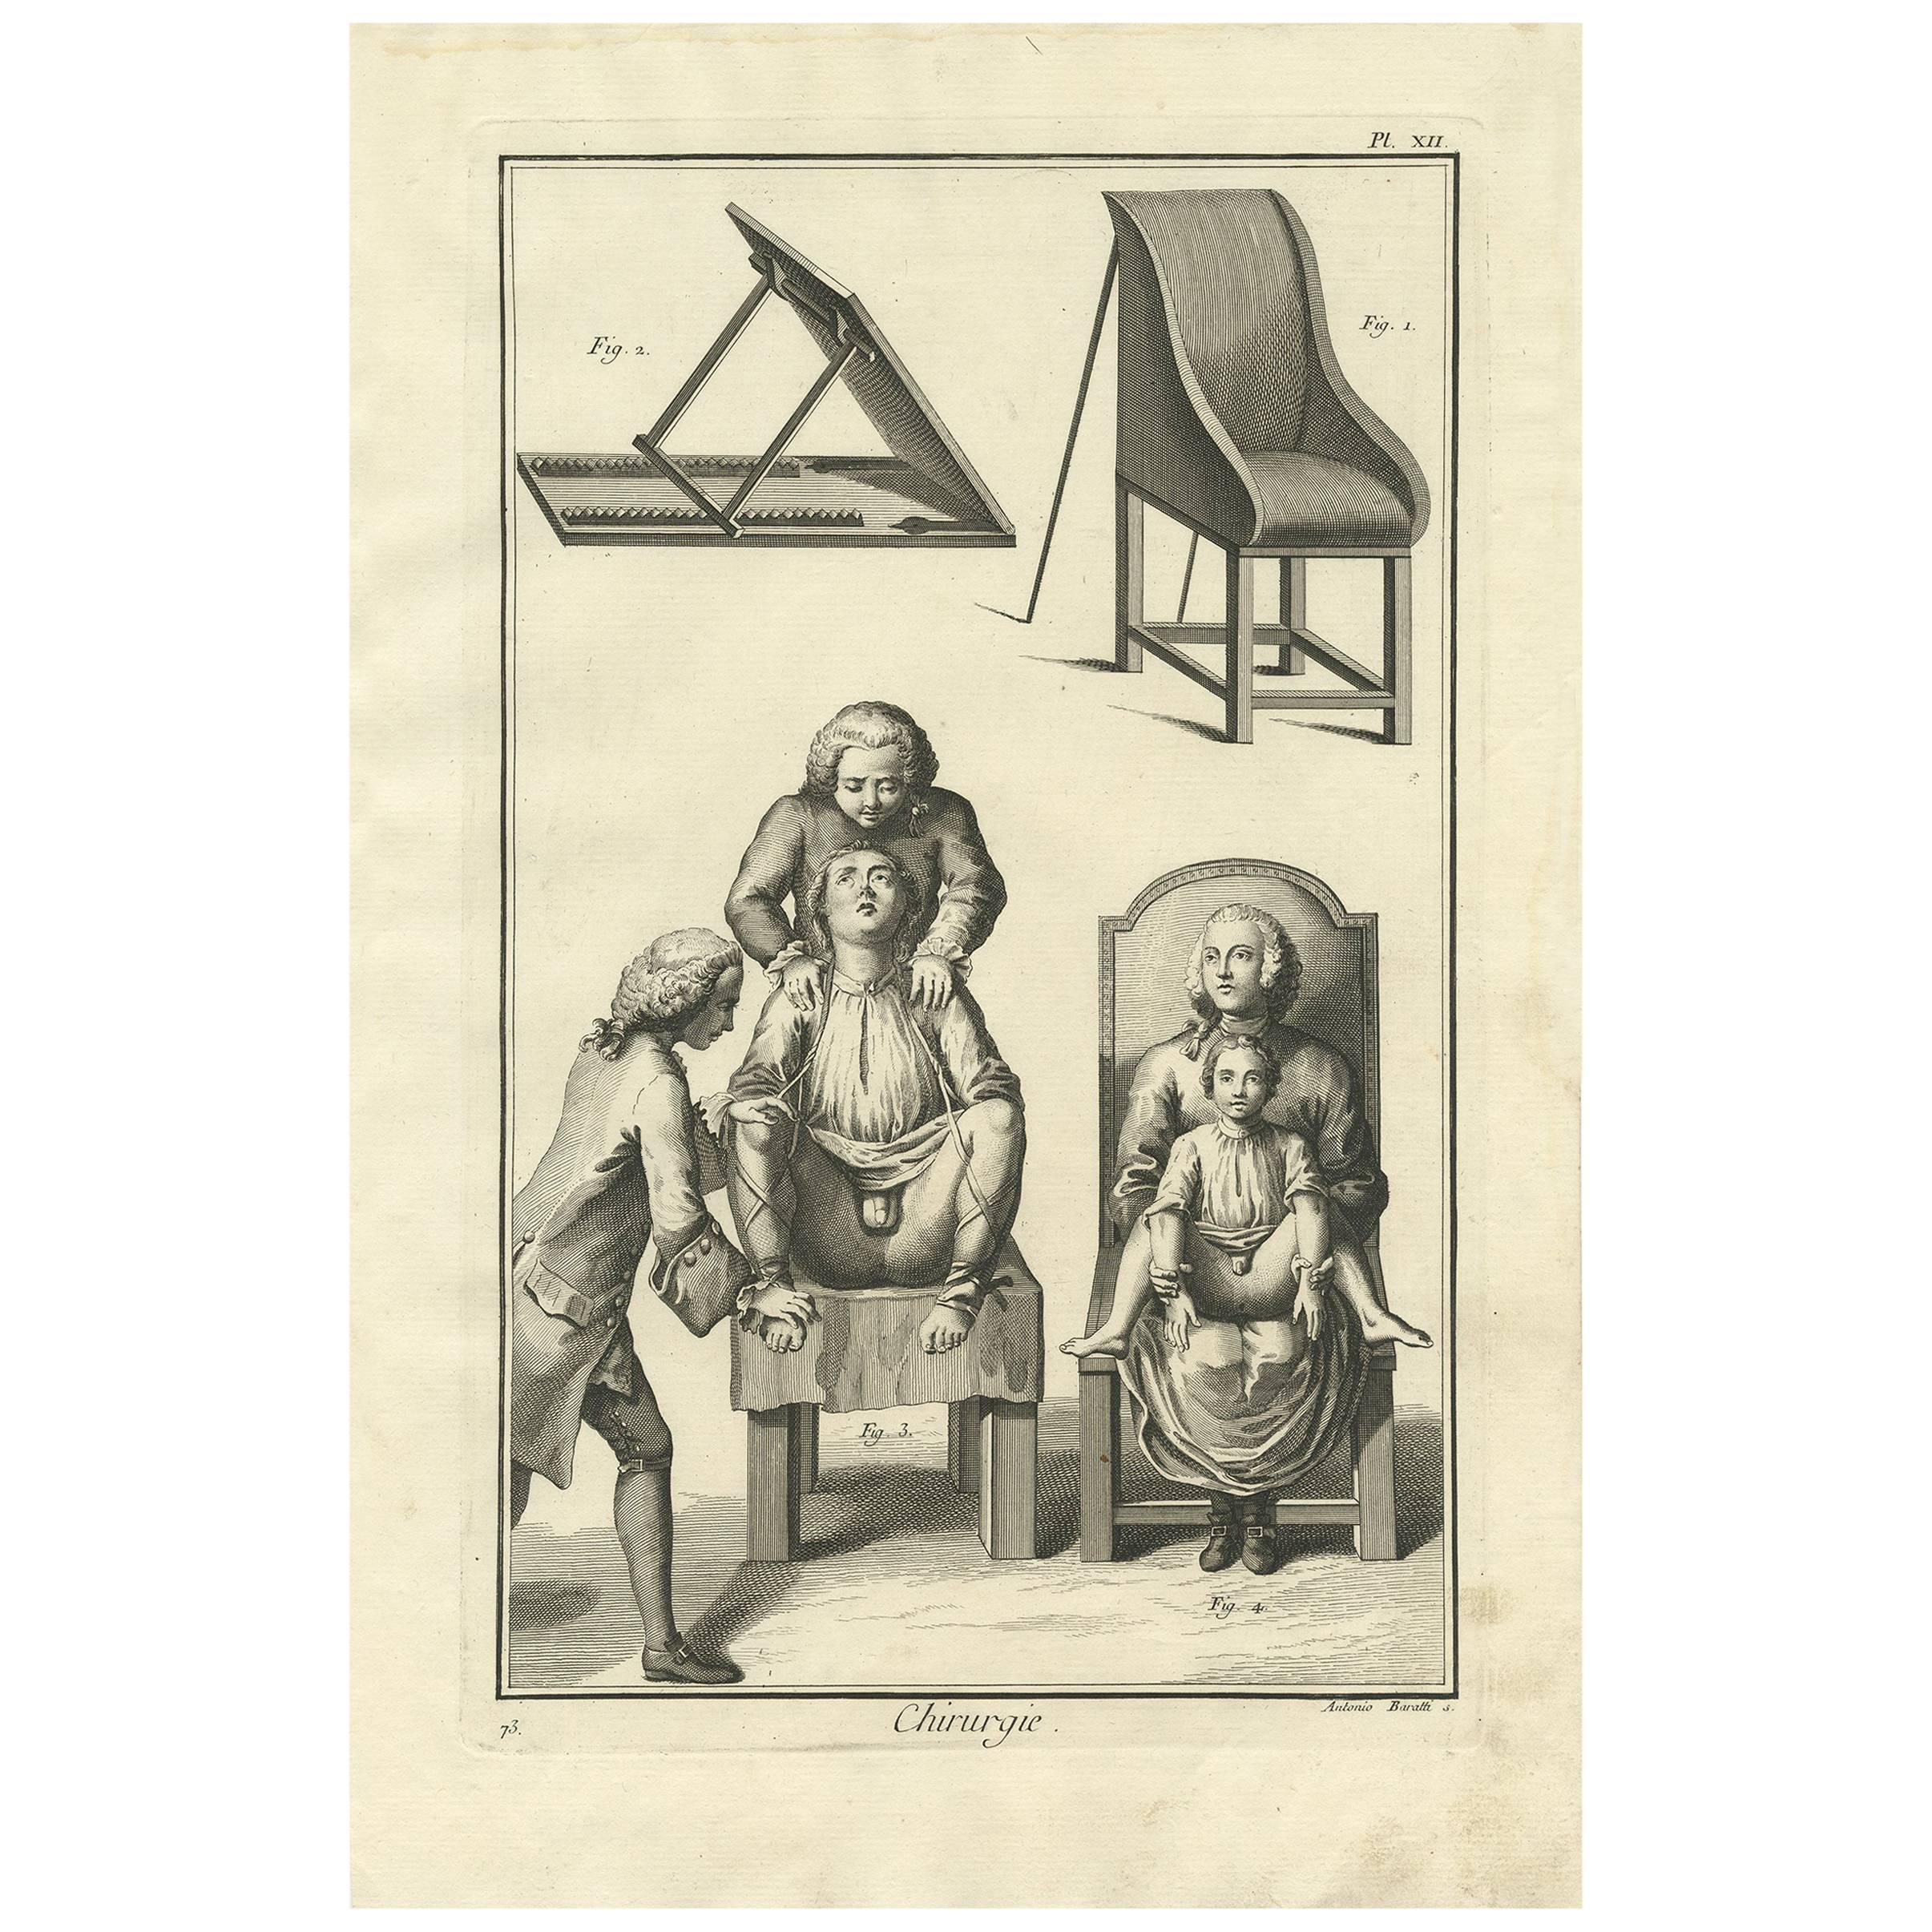 Antique Medical Print 'Pl. XII' by D. Diderot, circa 1760